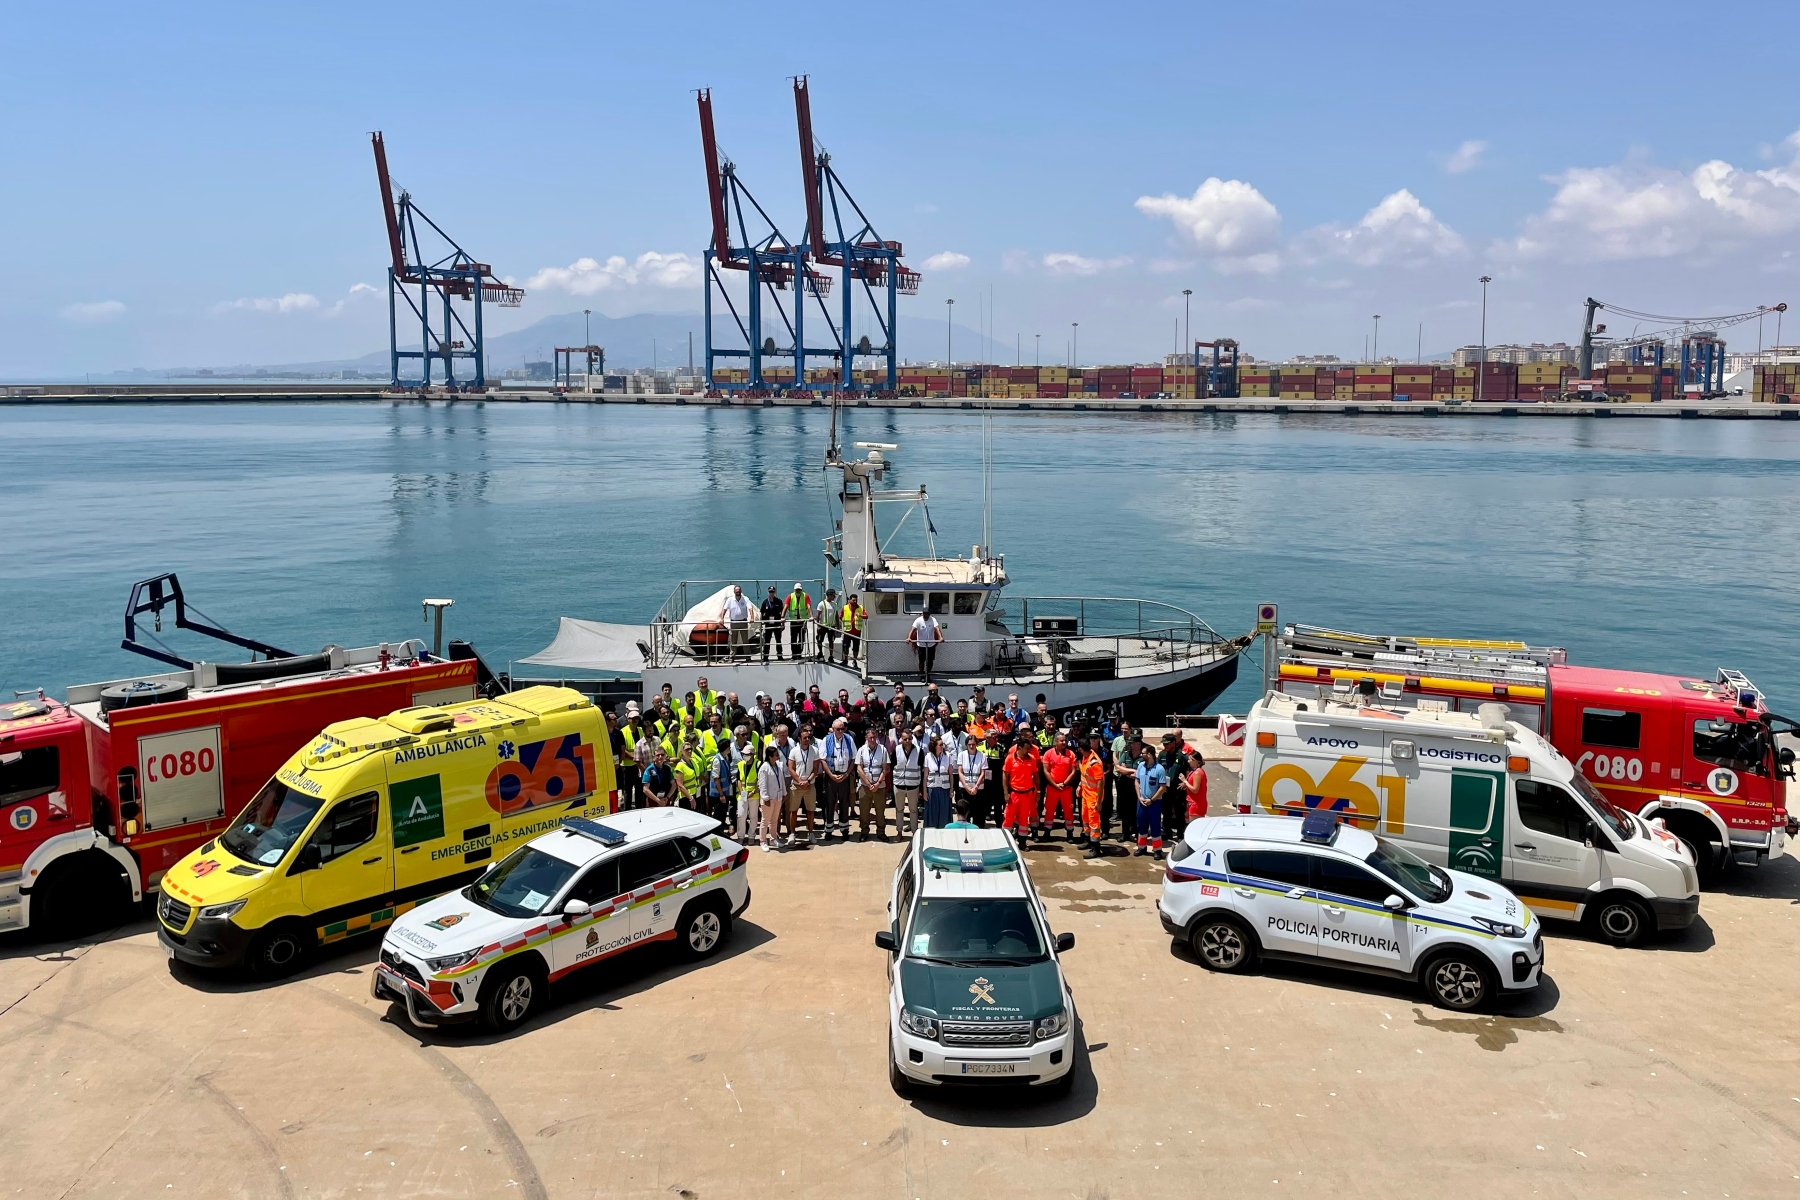 The ITIS participates in a simulation in the facilities of the Port of Malaga of the communications solutions for Public Safety developed in the European project Broadway